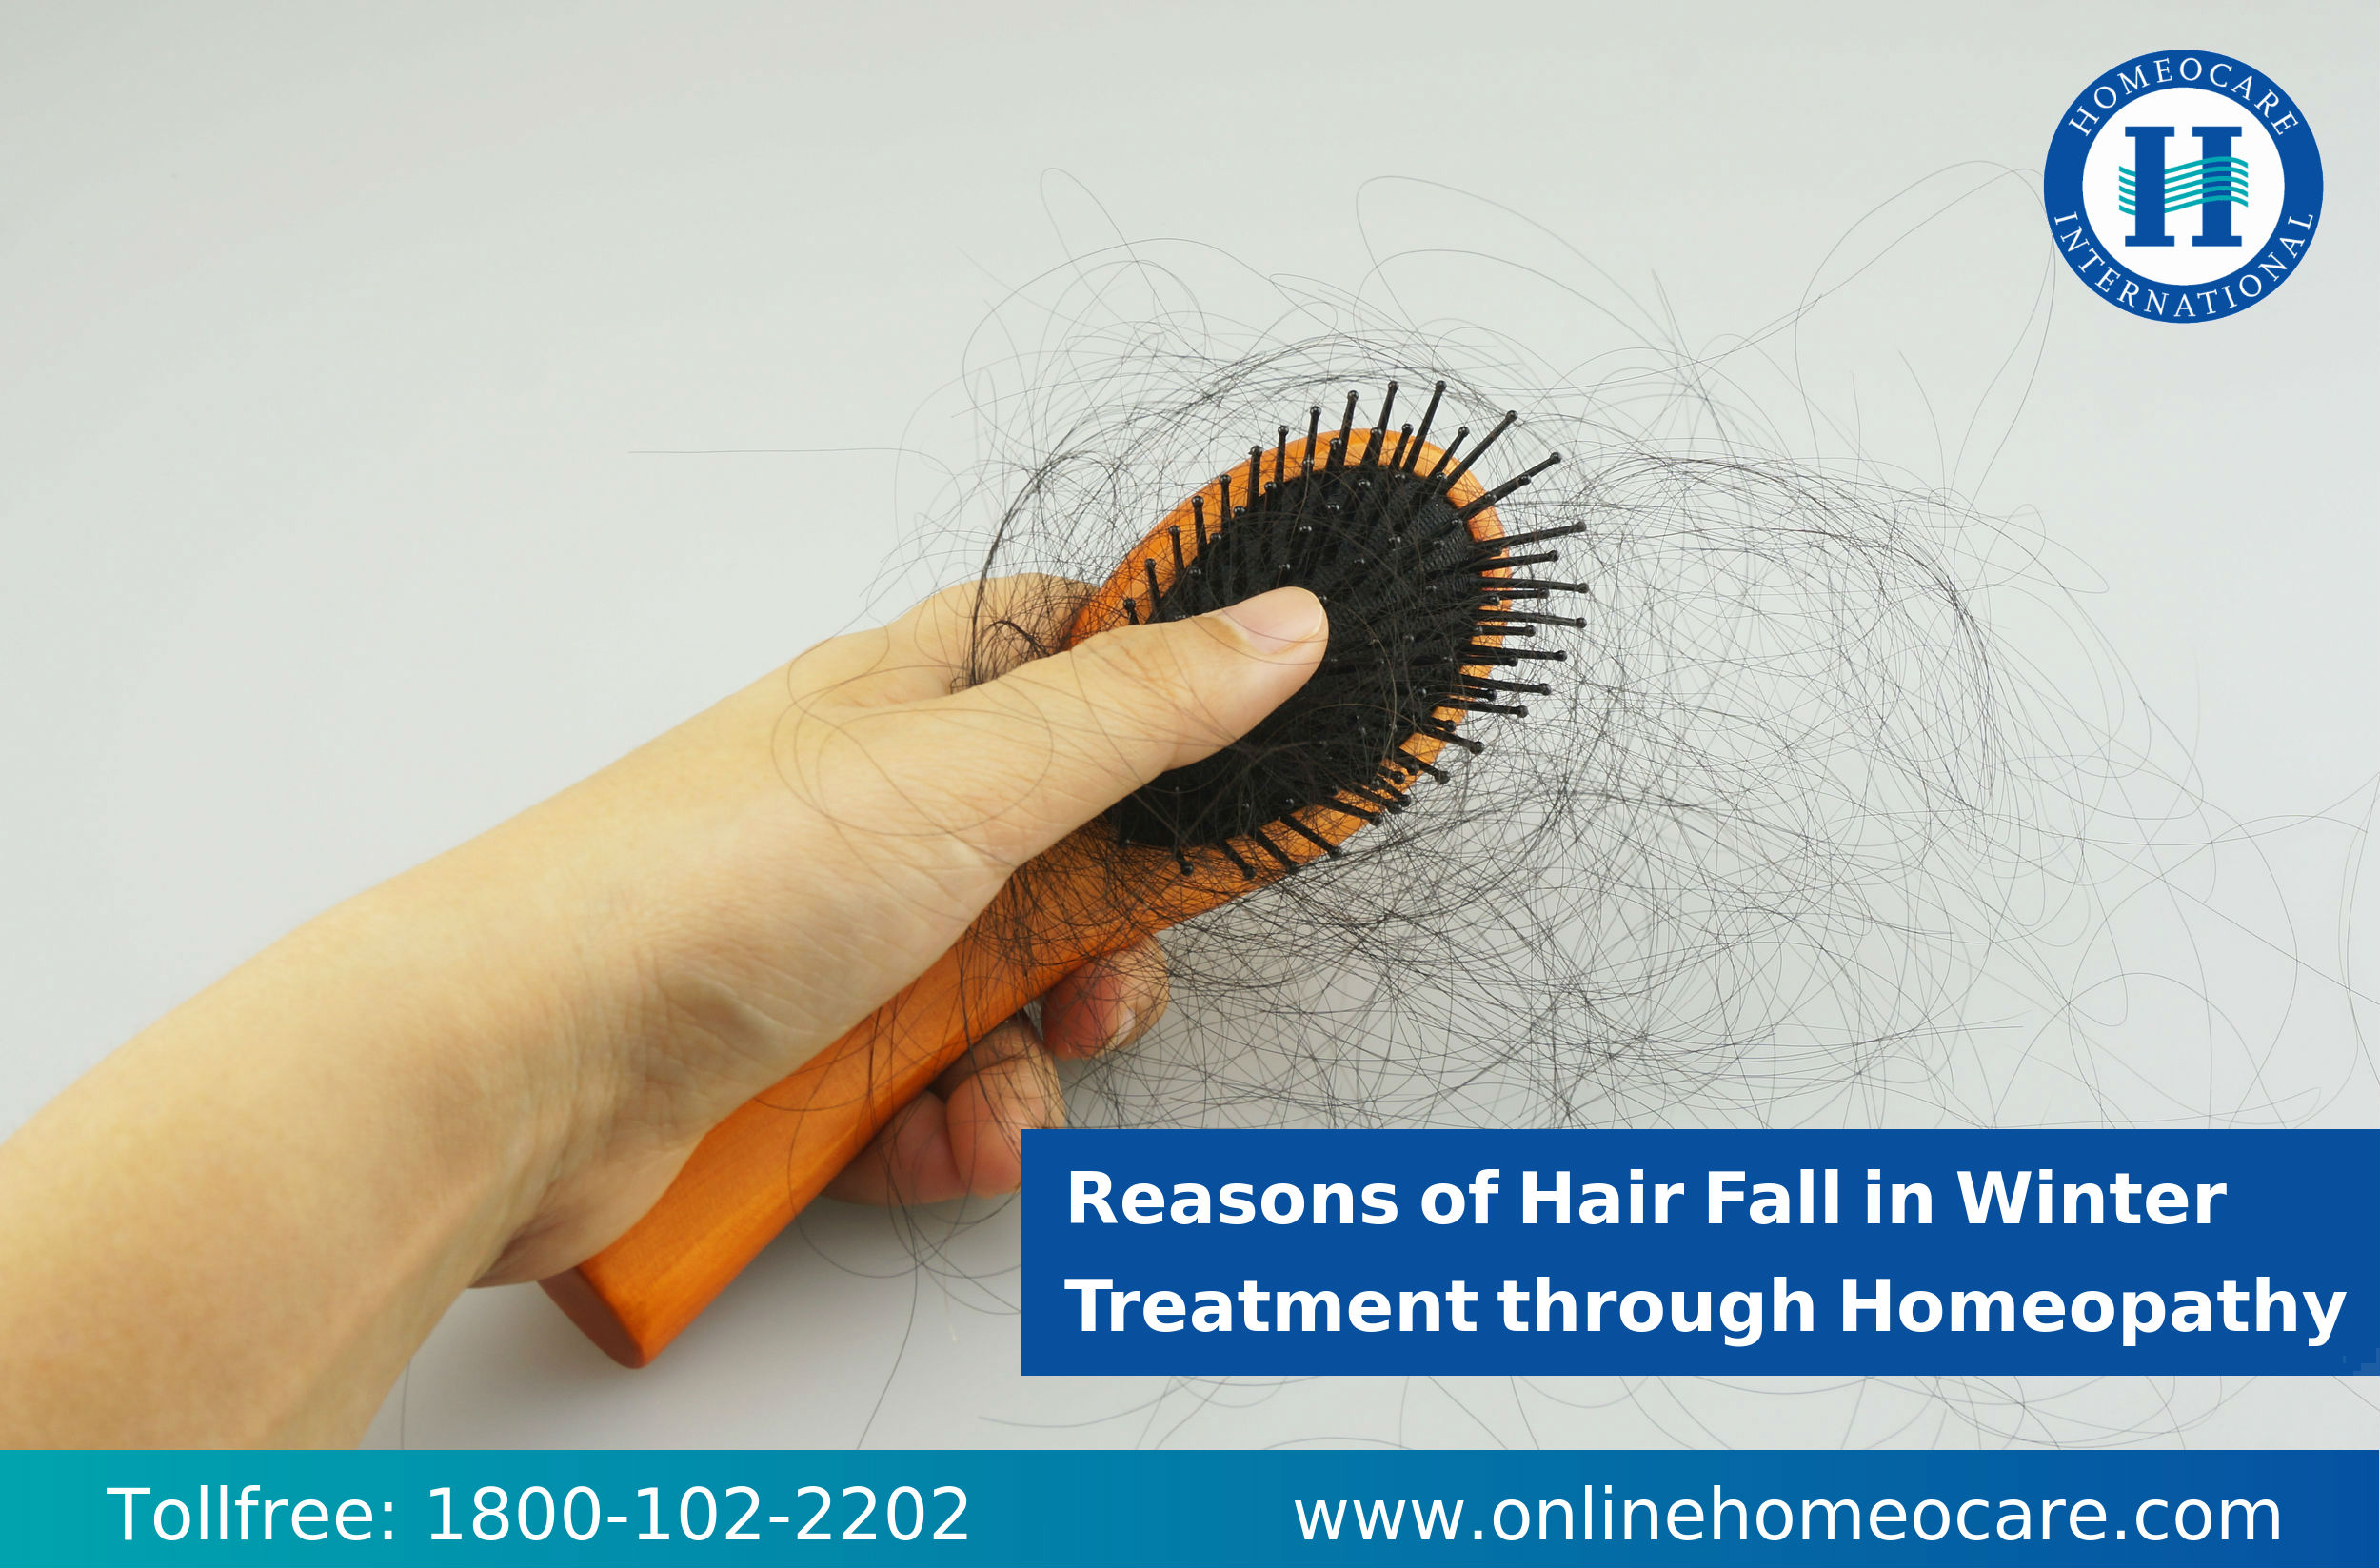 Reasons of Hair Fall in WinterTreatment through Homeopathy